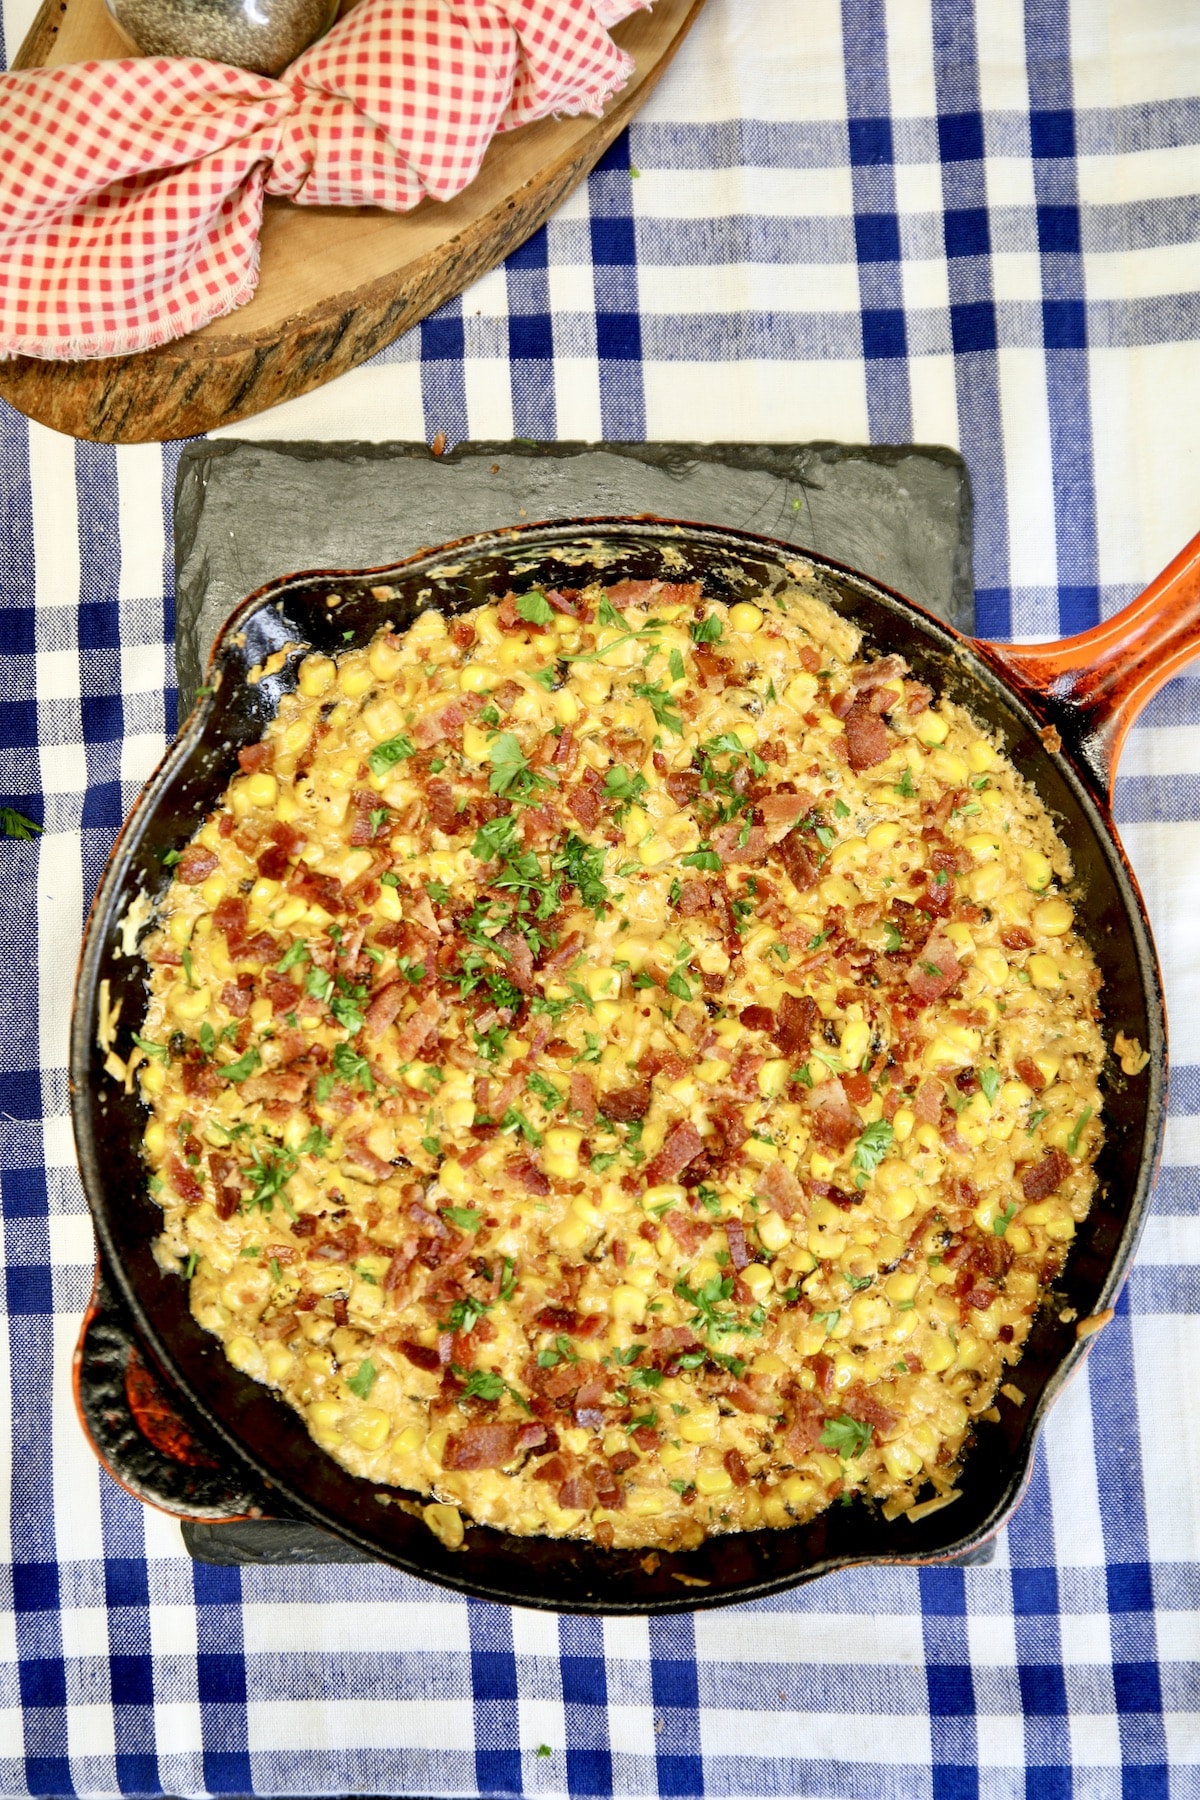 Skillet of creamed corn with bacon.